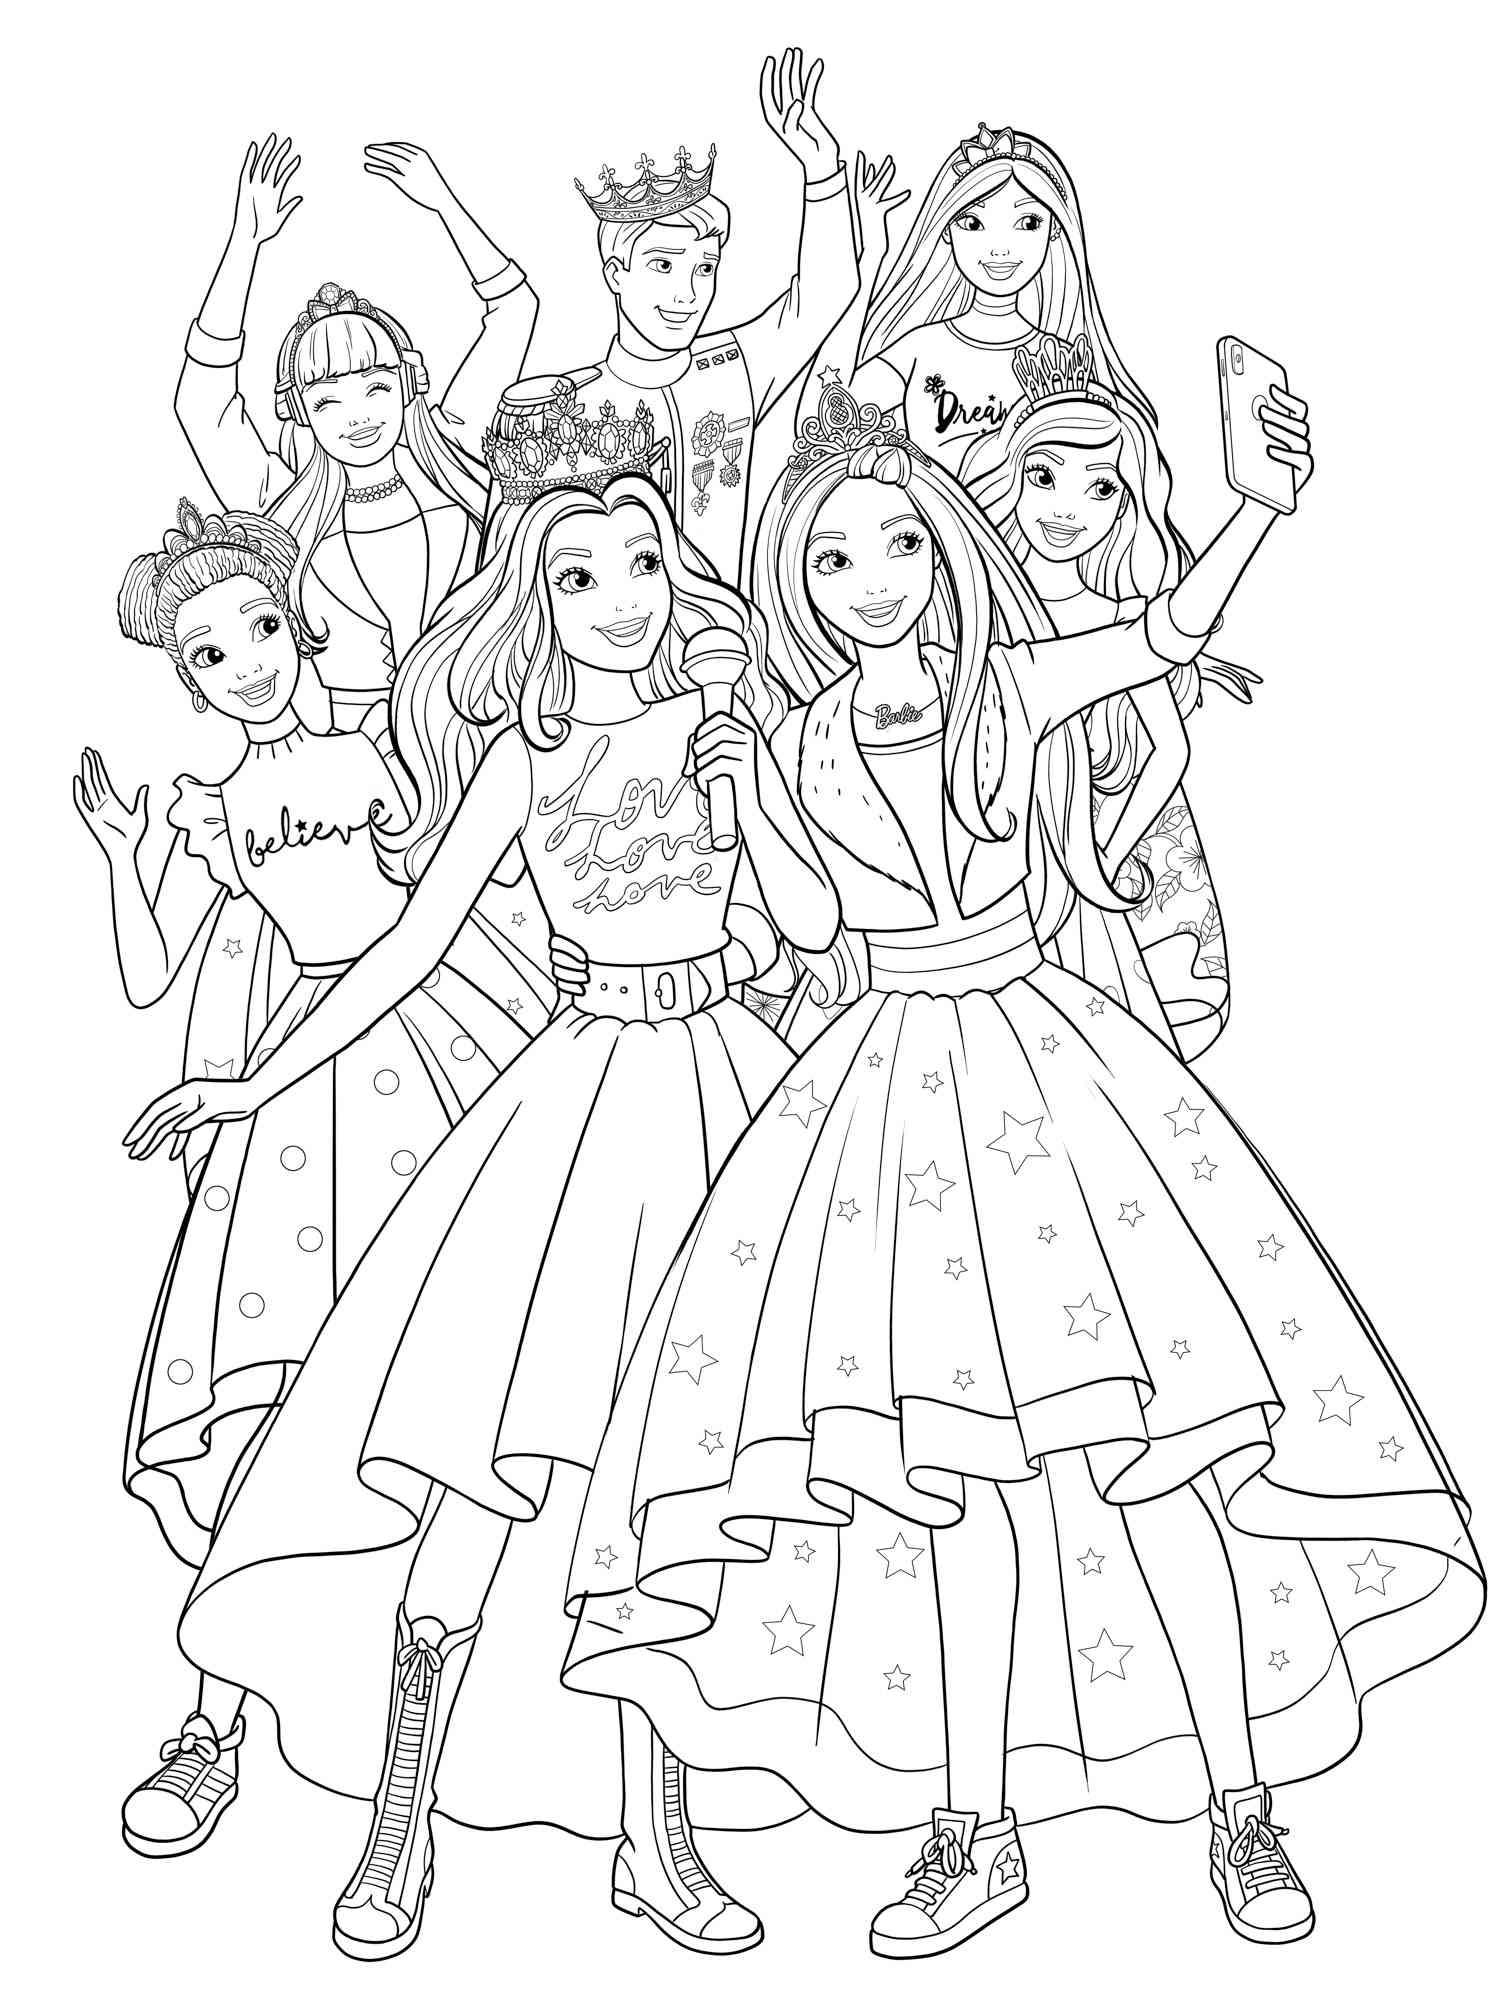 Barbie Princess and her friends coloring page